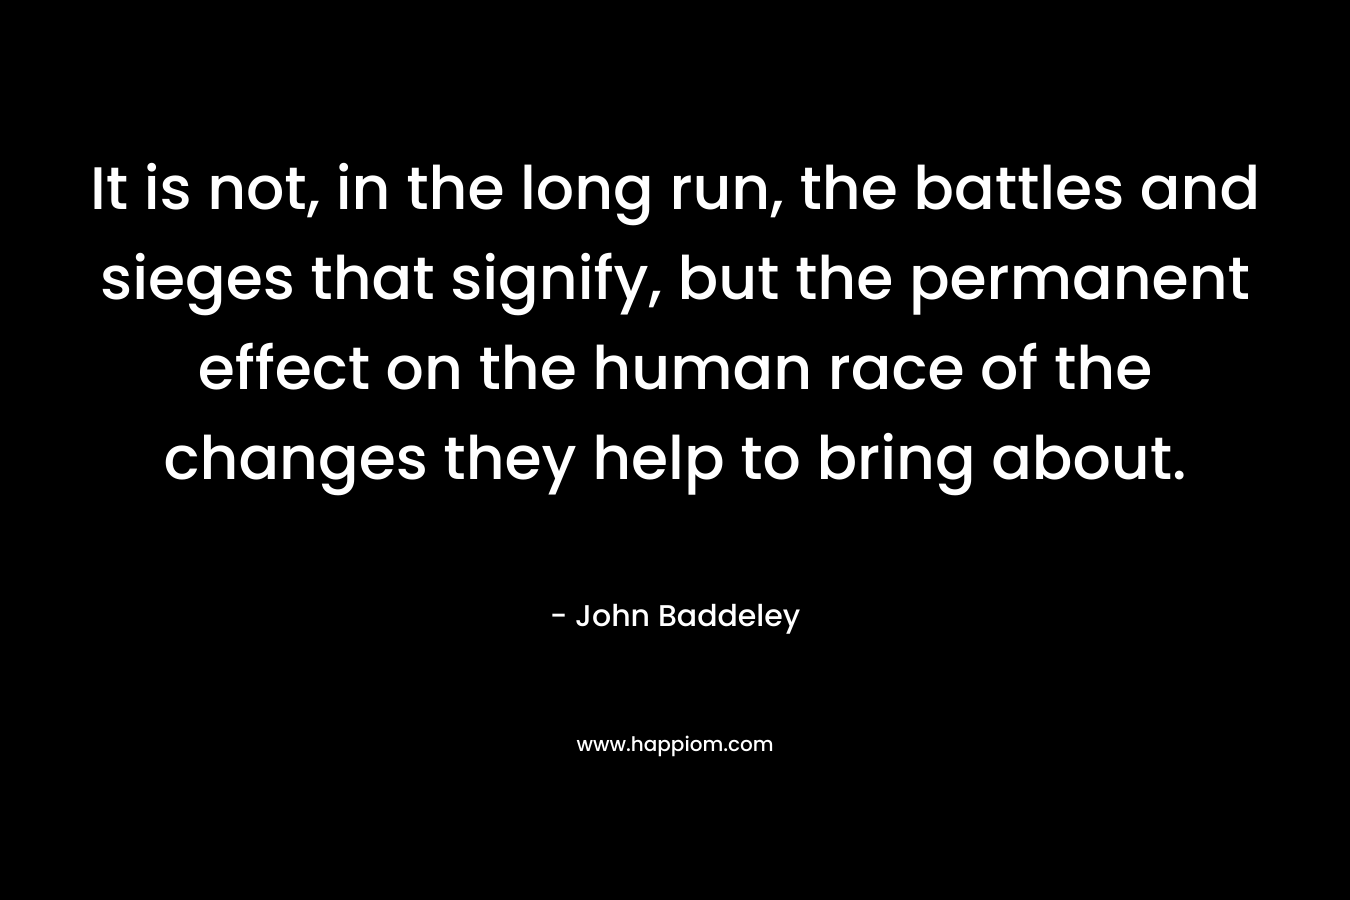 It is not, in the long run, the battles and sieges that signify, but the permanent effect on the human race of the changes they help to bring about. – John Baddeley